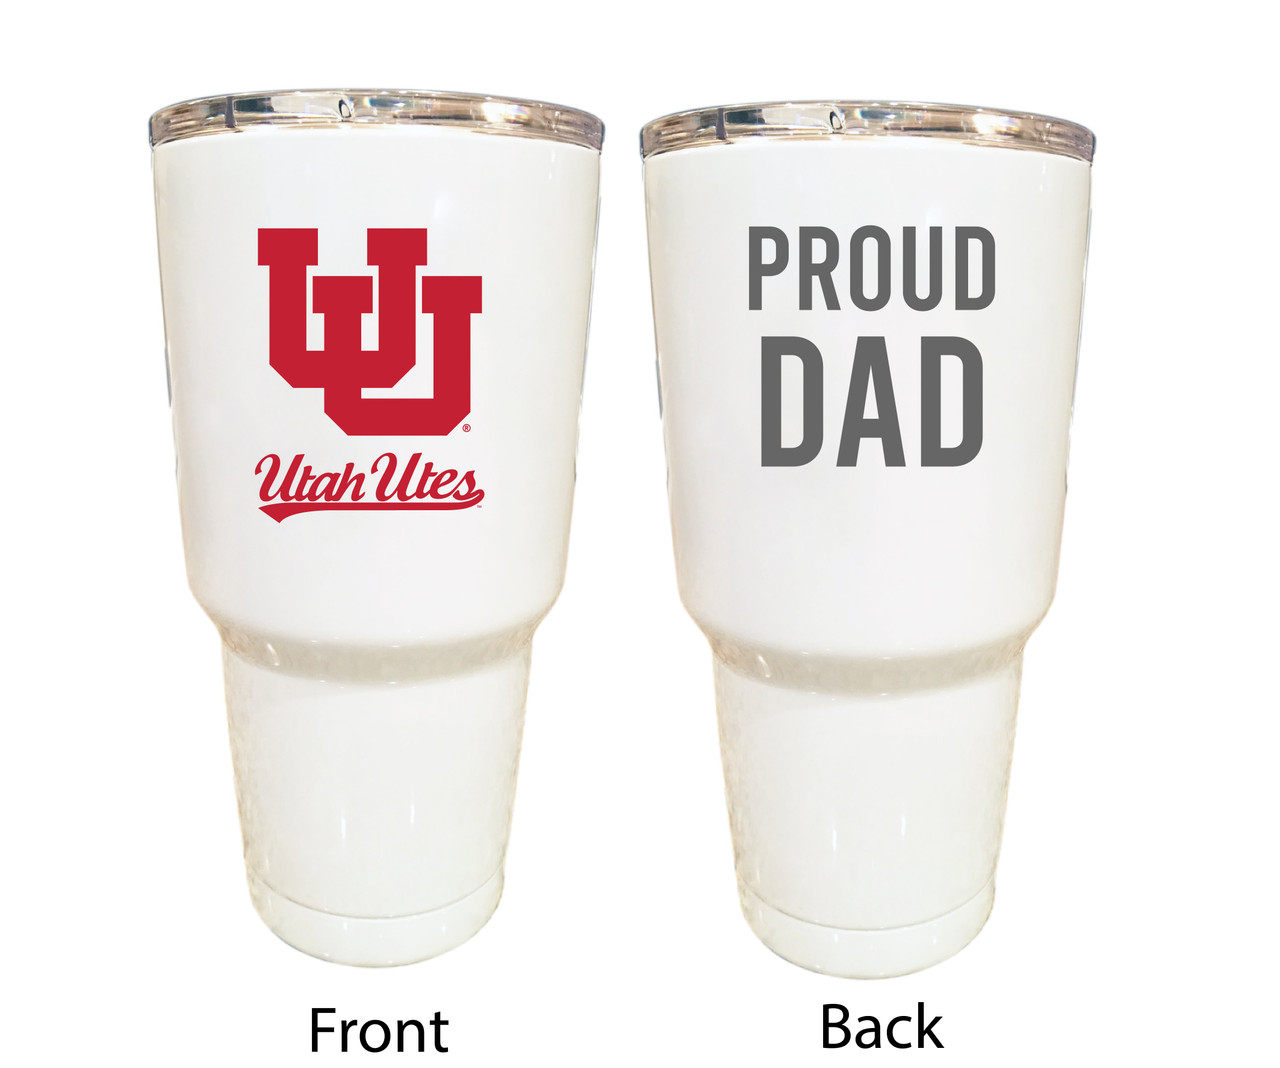 Utah Utes Proud Dad 24 oz Insulated Stainless Steel Tumblers Choose Your Color.